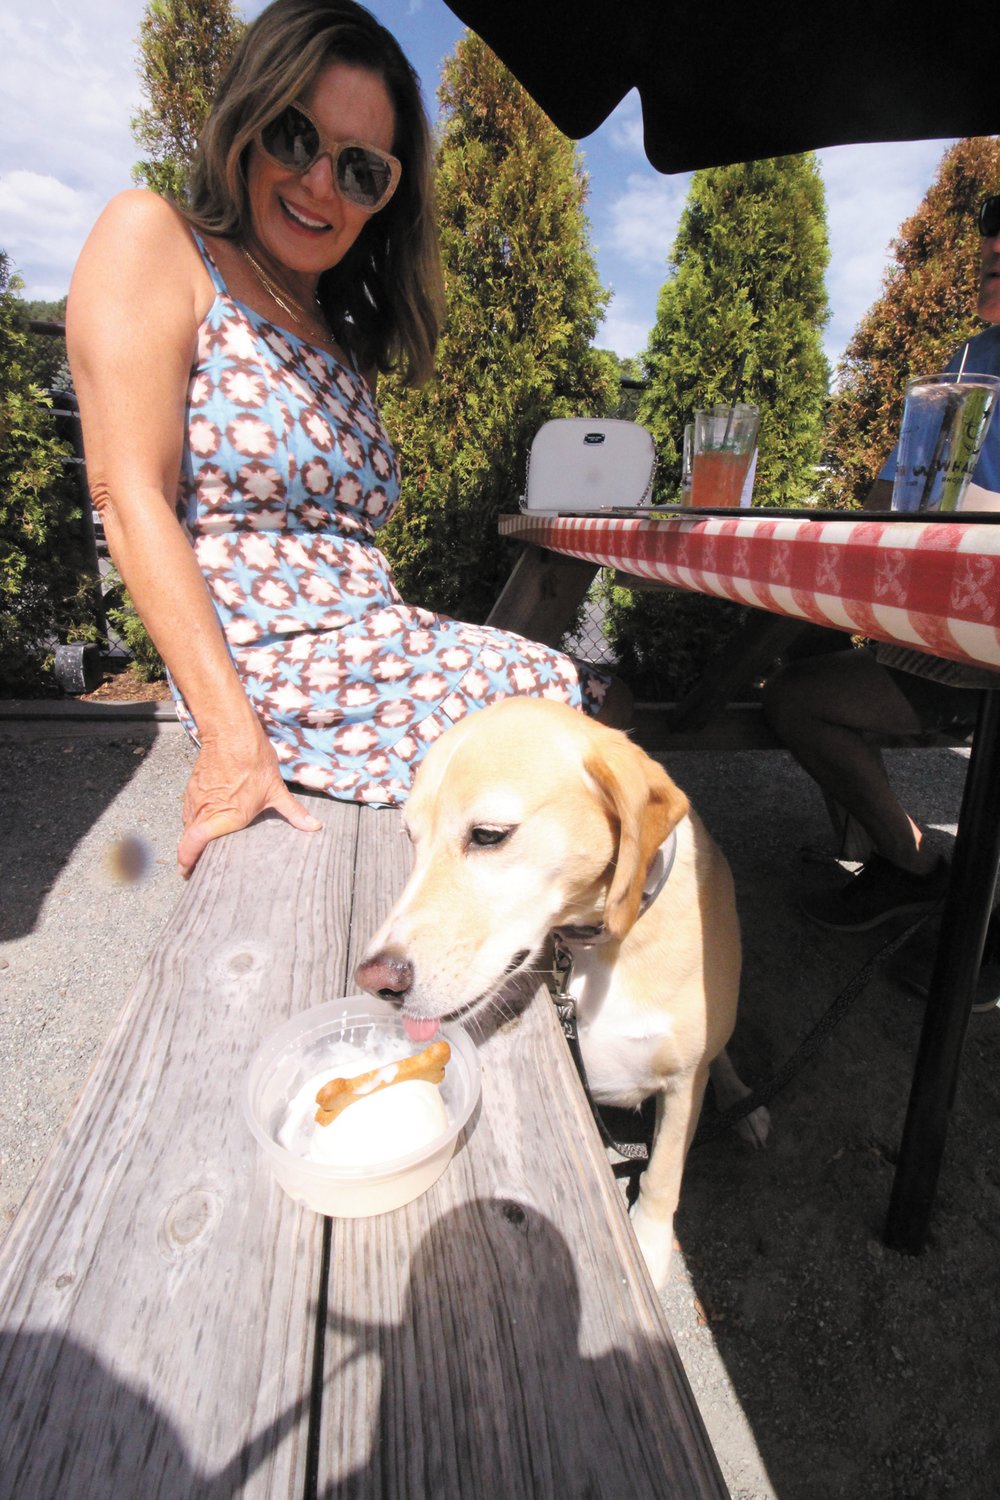 DOGGIE SUNDEA: Blondie slurps up vanilla ice cream topped with a dog biscuit. Christine Carbone of Cranston says the dog loves ice cream.